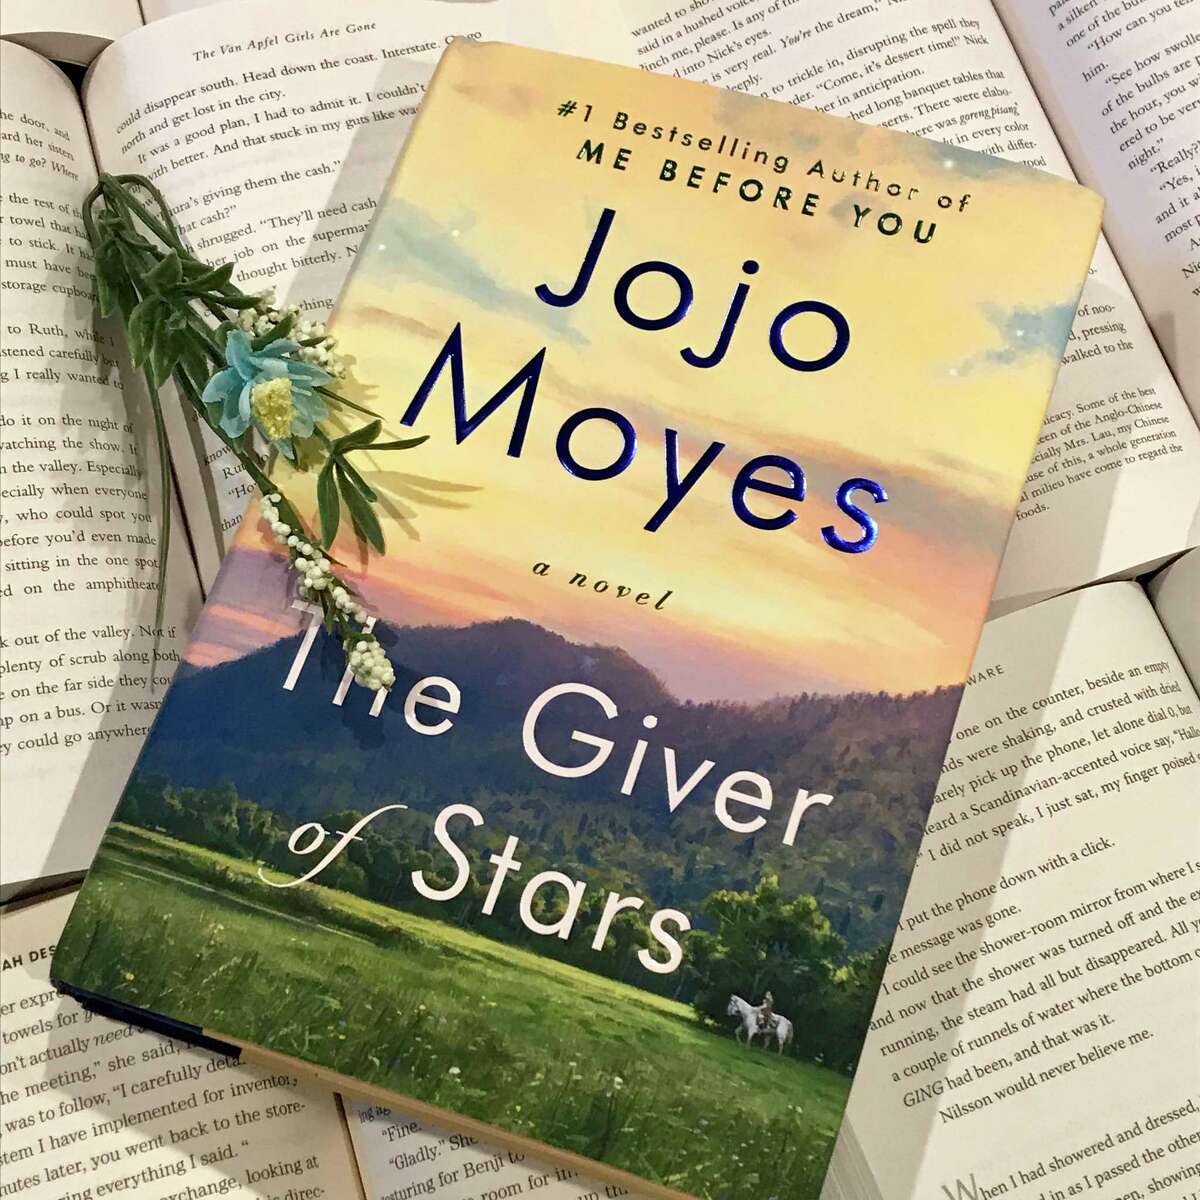 “The Giver of Stars” by Jojo Moyes was published on Oct. 8.